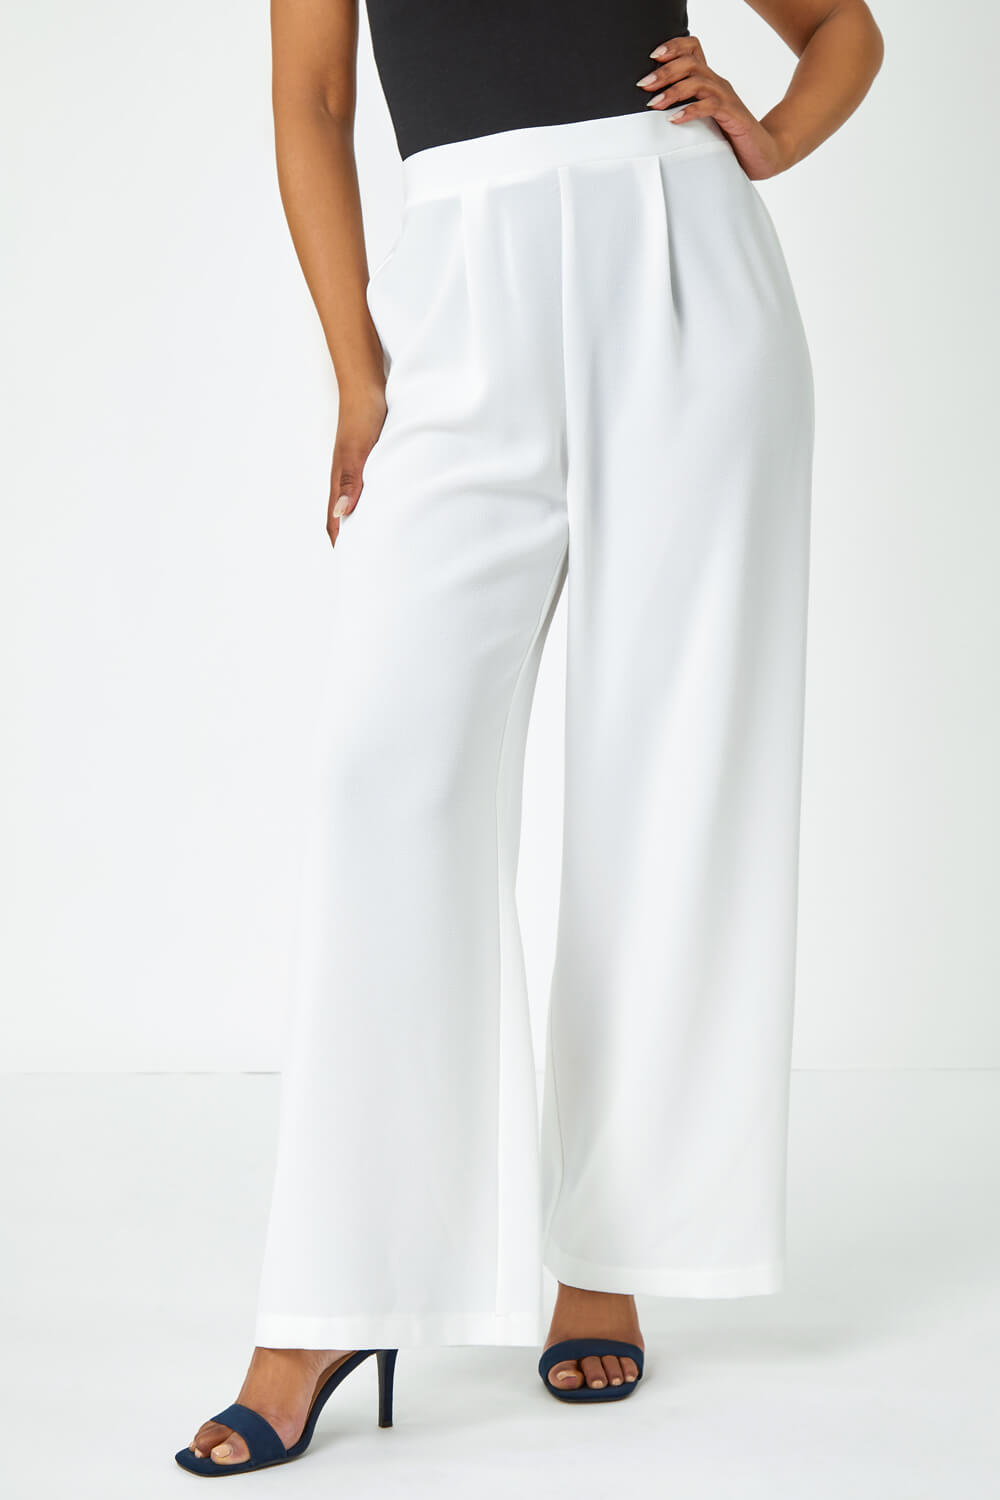 Ivory  Petite Wide Leg Stretch Trousers, Image 2 of 6